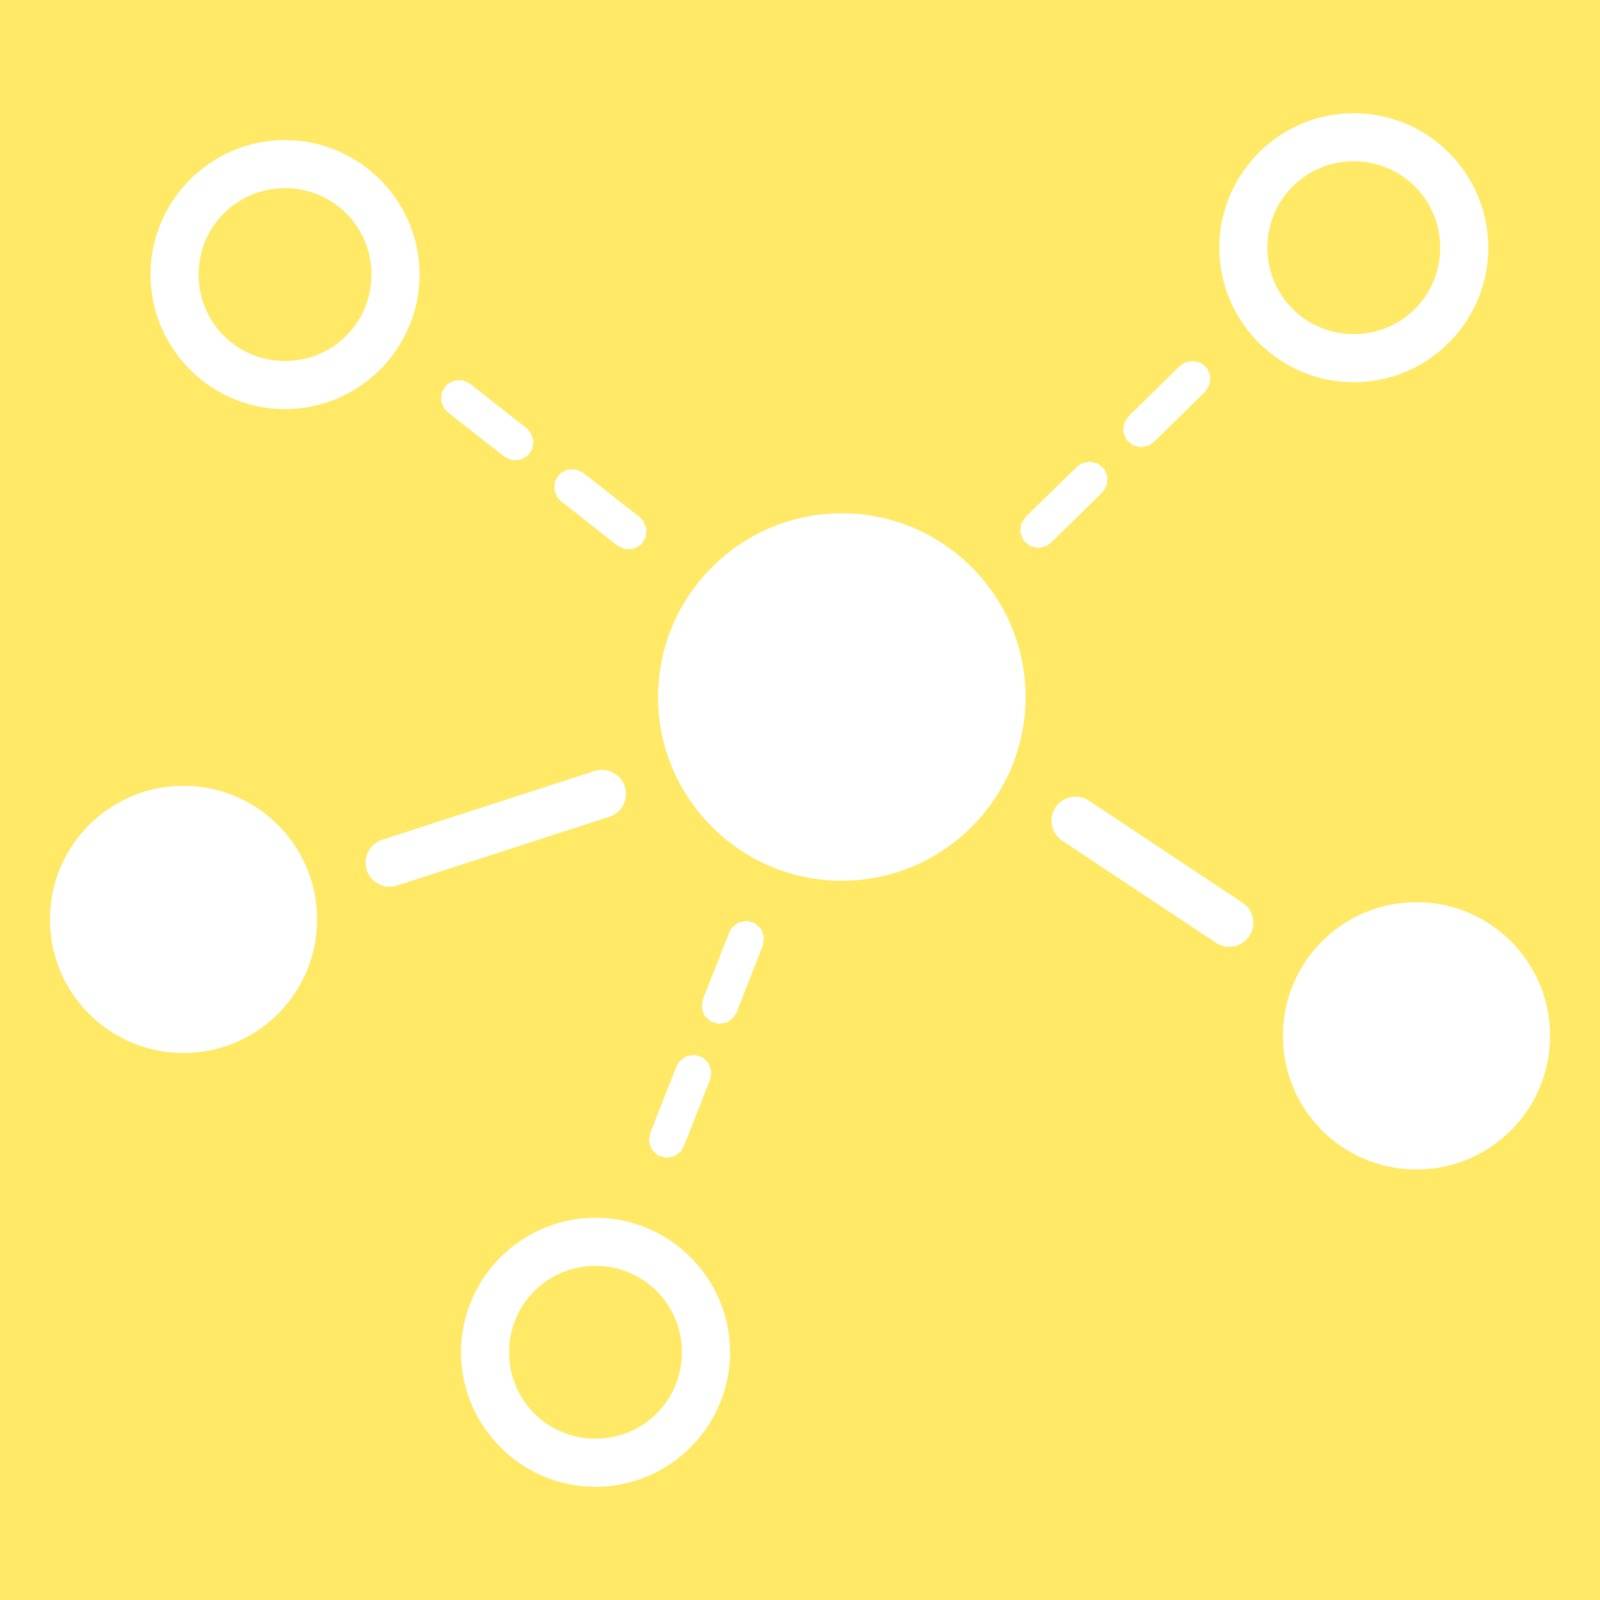 Structure icon. This flat vector symbol uses white color, rounded angles, and isolated on a yellow background.